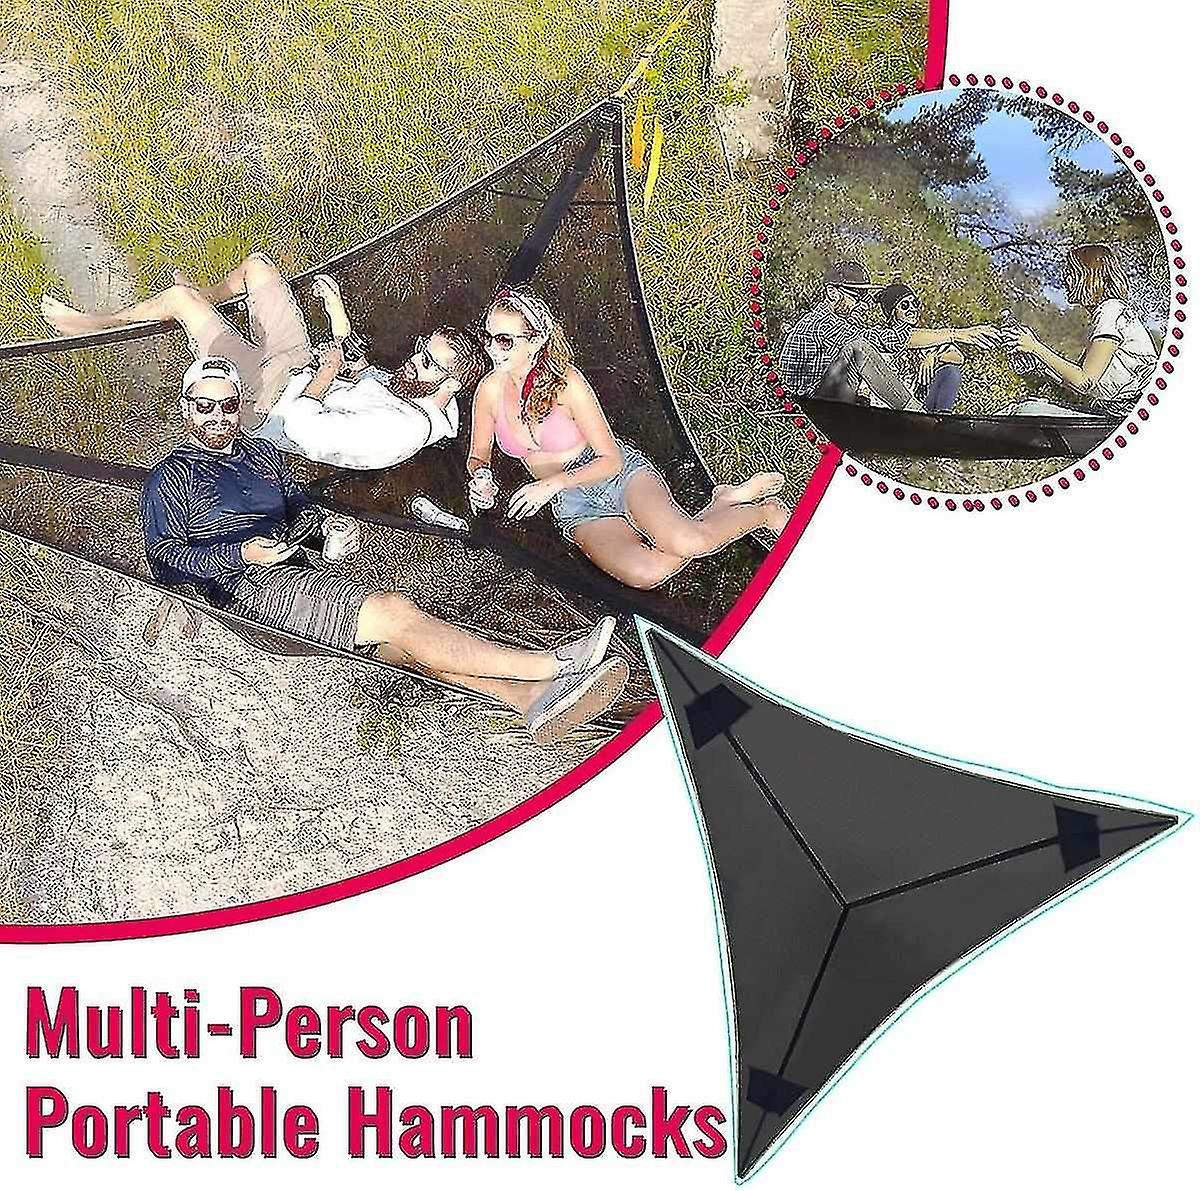 Giant Aerial Camping Hammock， Multi Person Portable Hammock 3 Point， Tree House Air Sky Tent， Outdoo